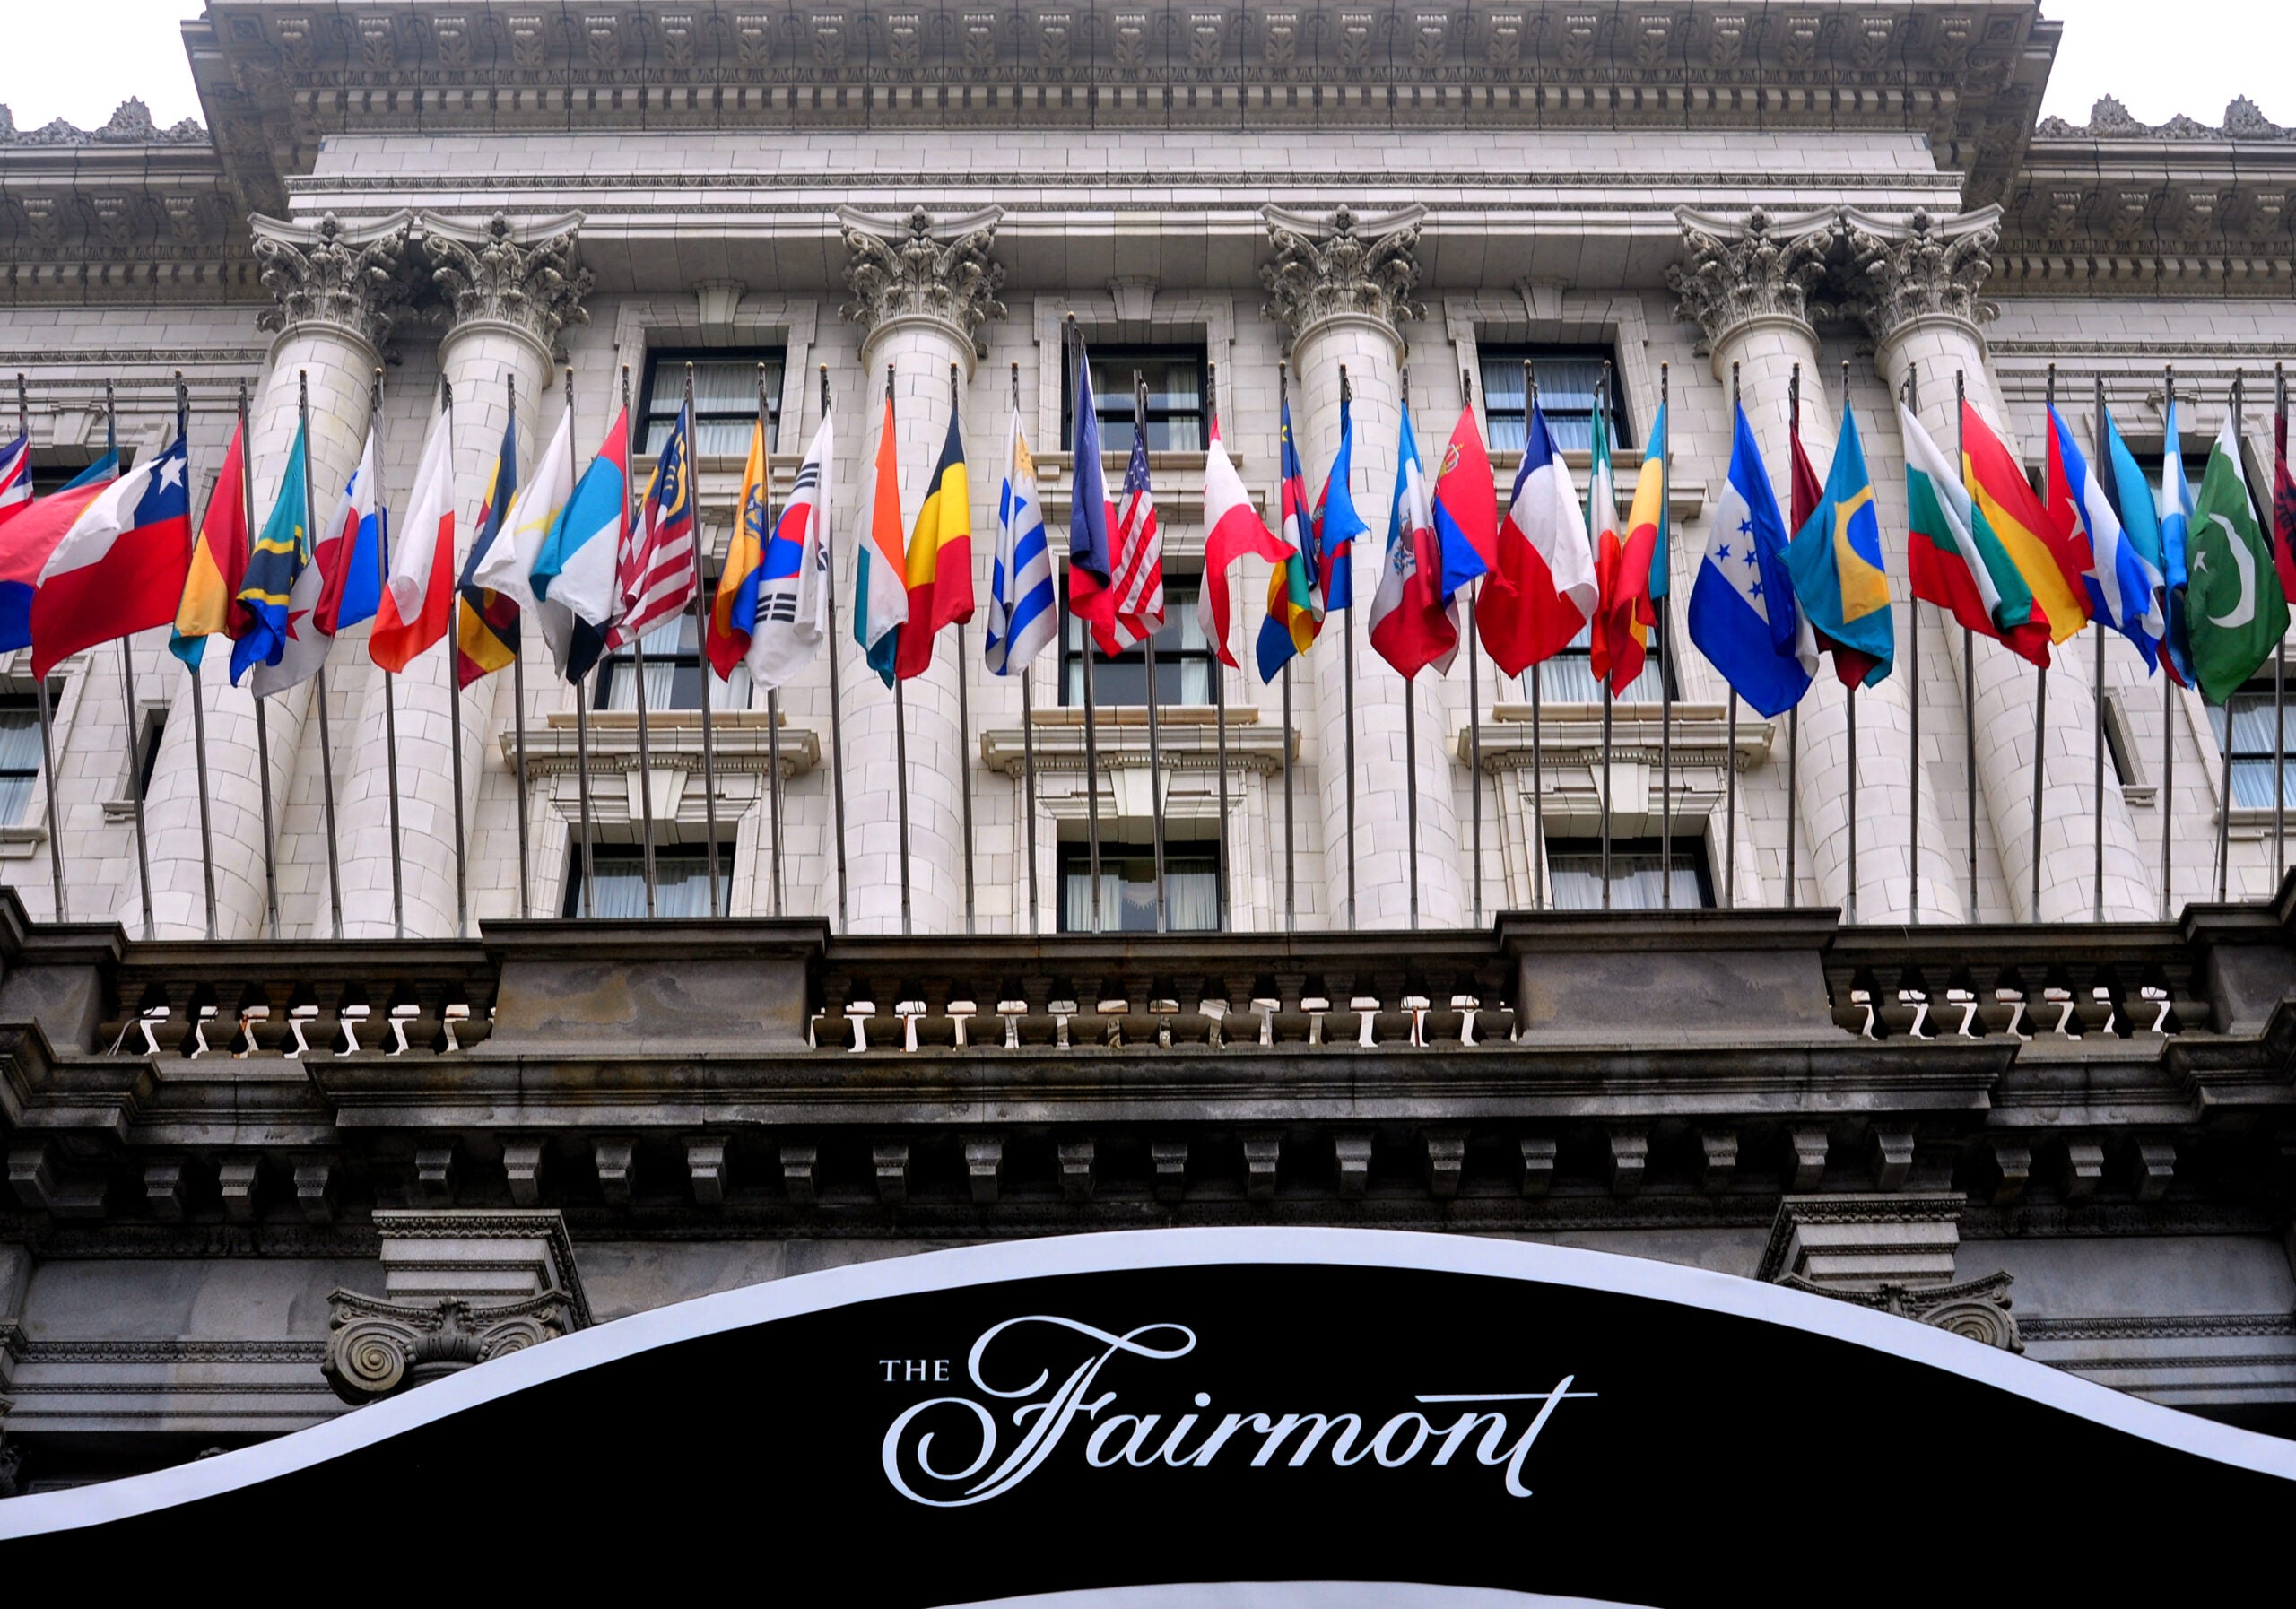 Fairmont hotel sign in San Francisco